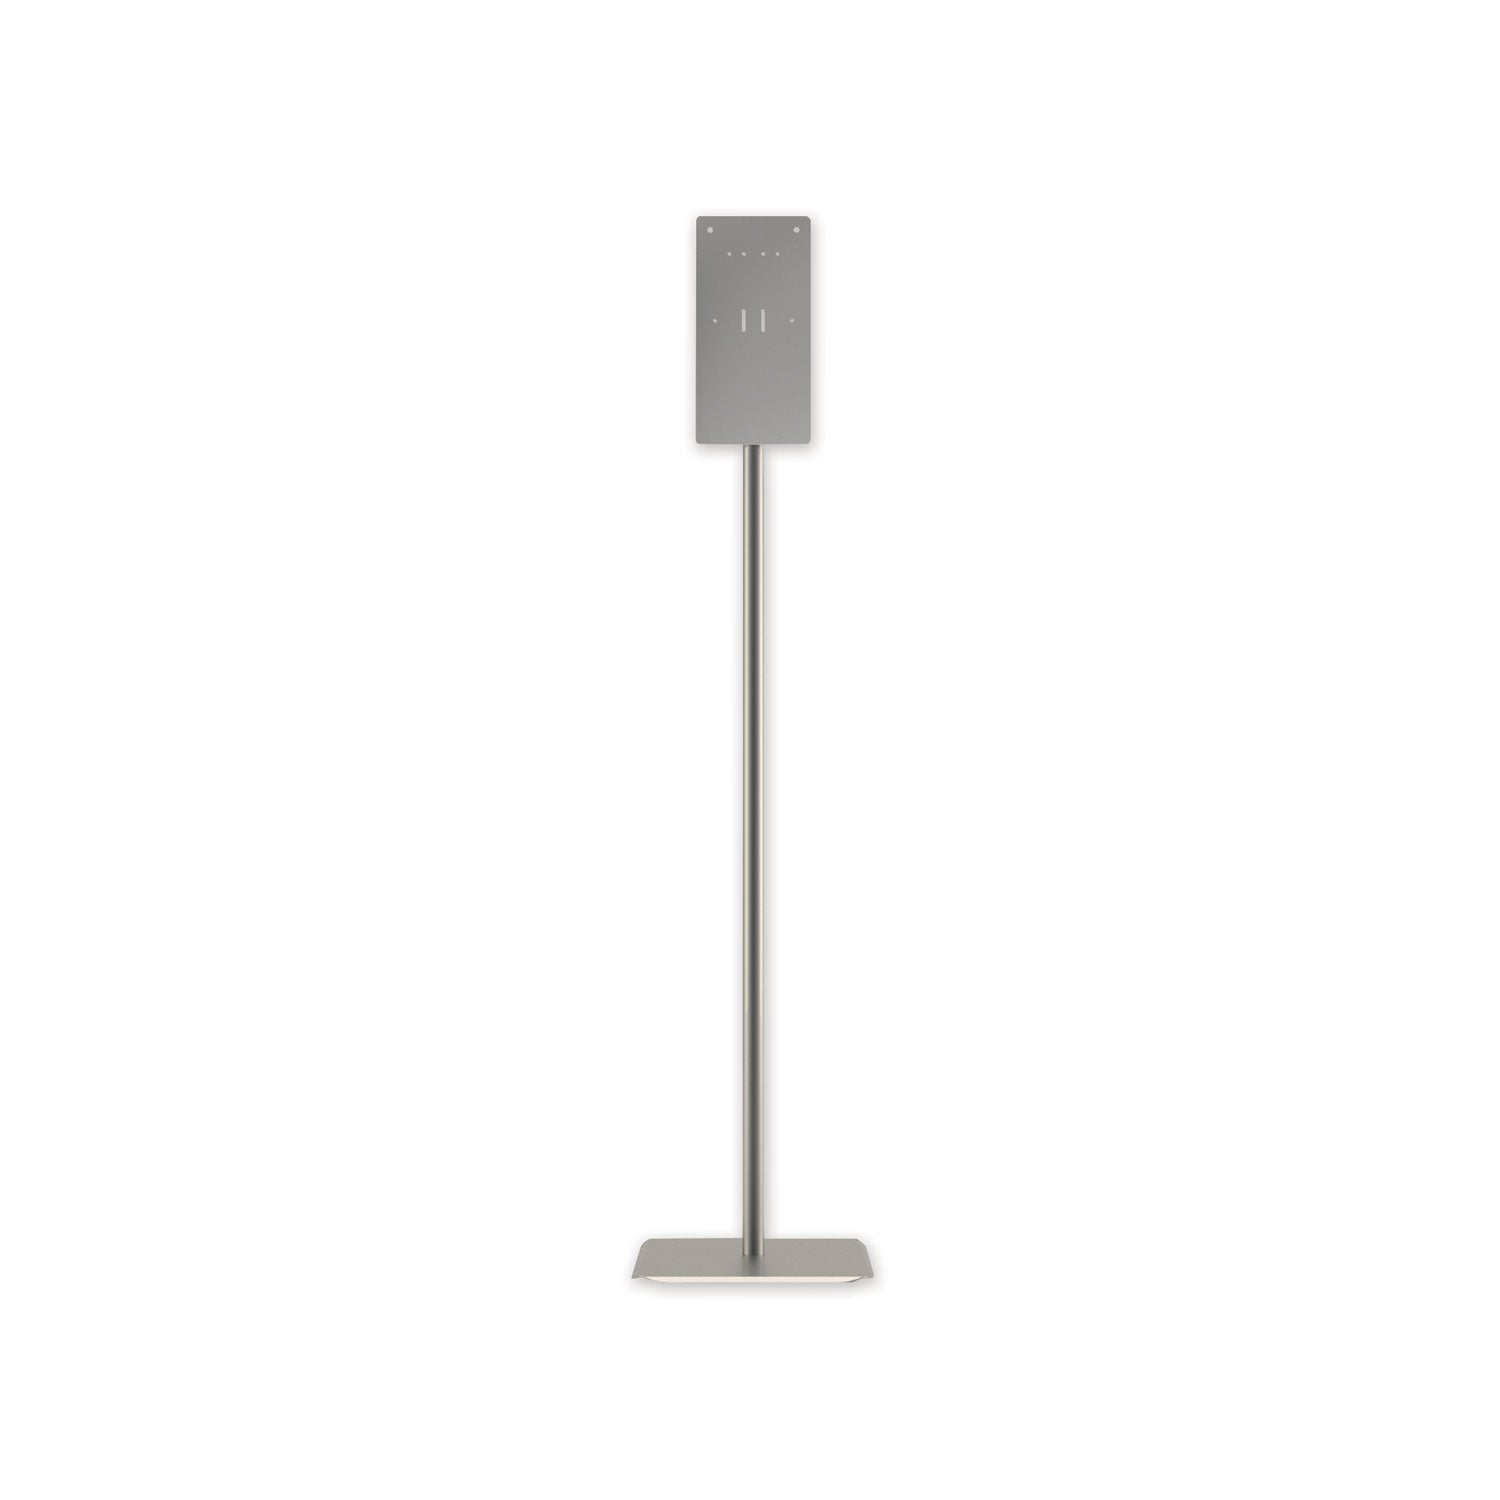 hand-sanitizer-station-stand-12-x-16-x-54-silver_honstandp8t - 1